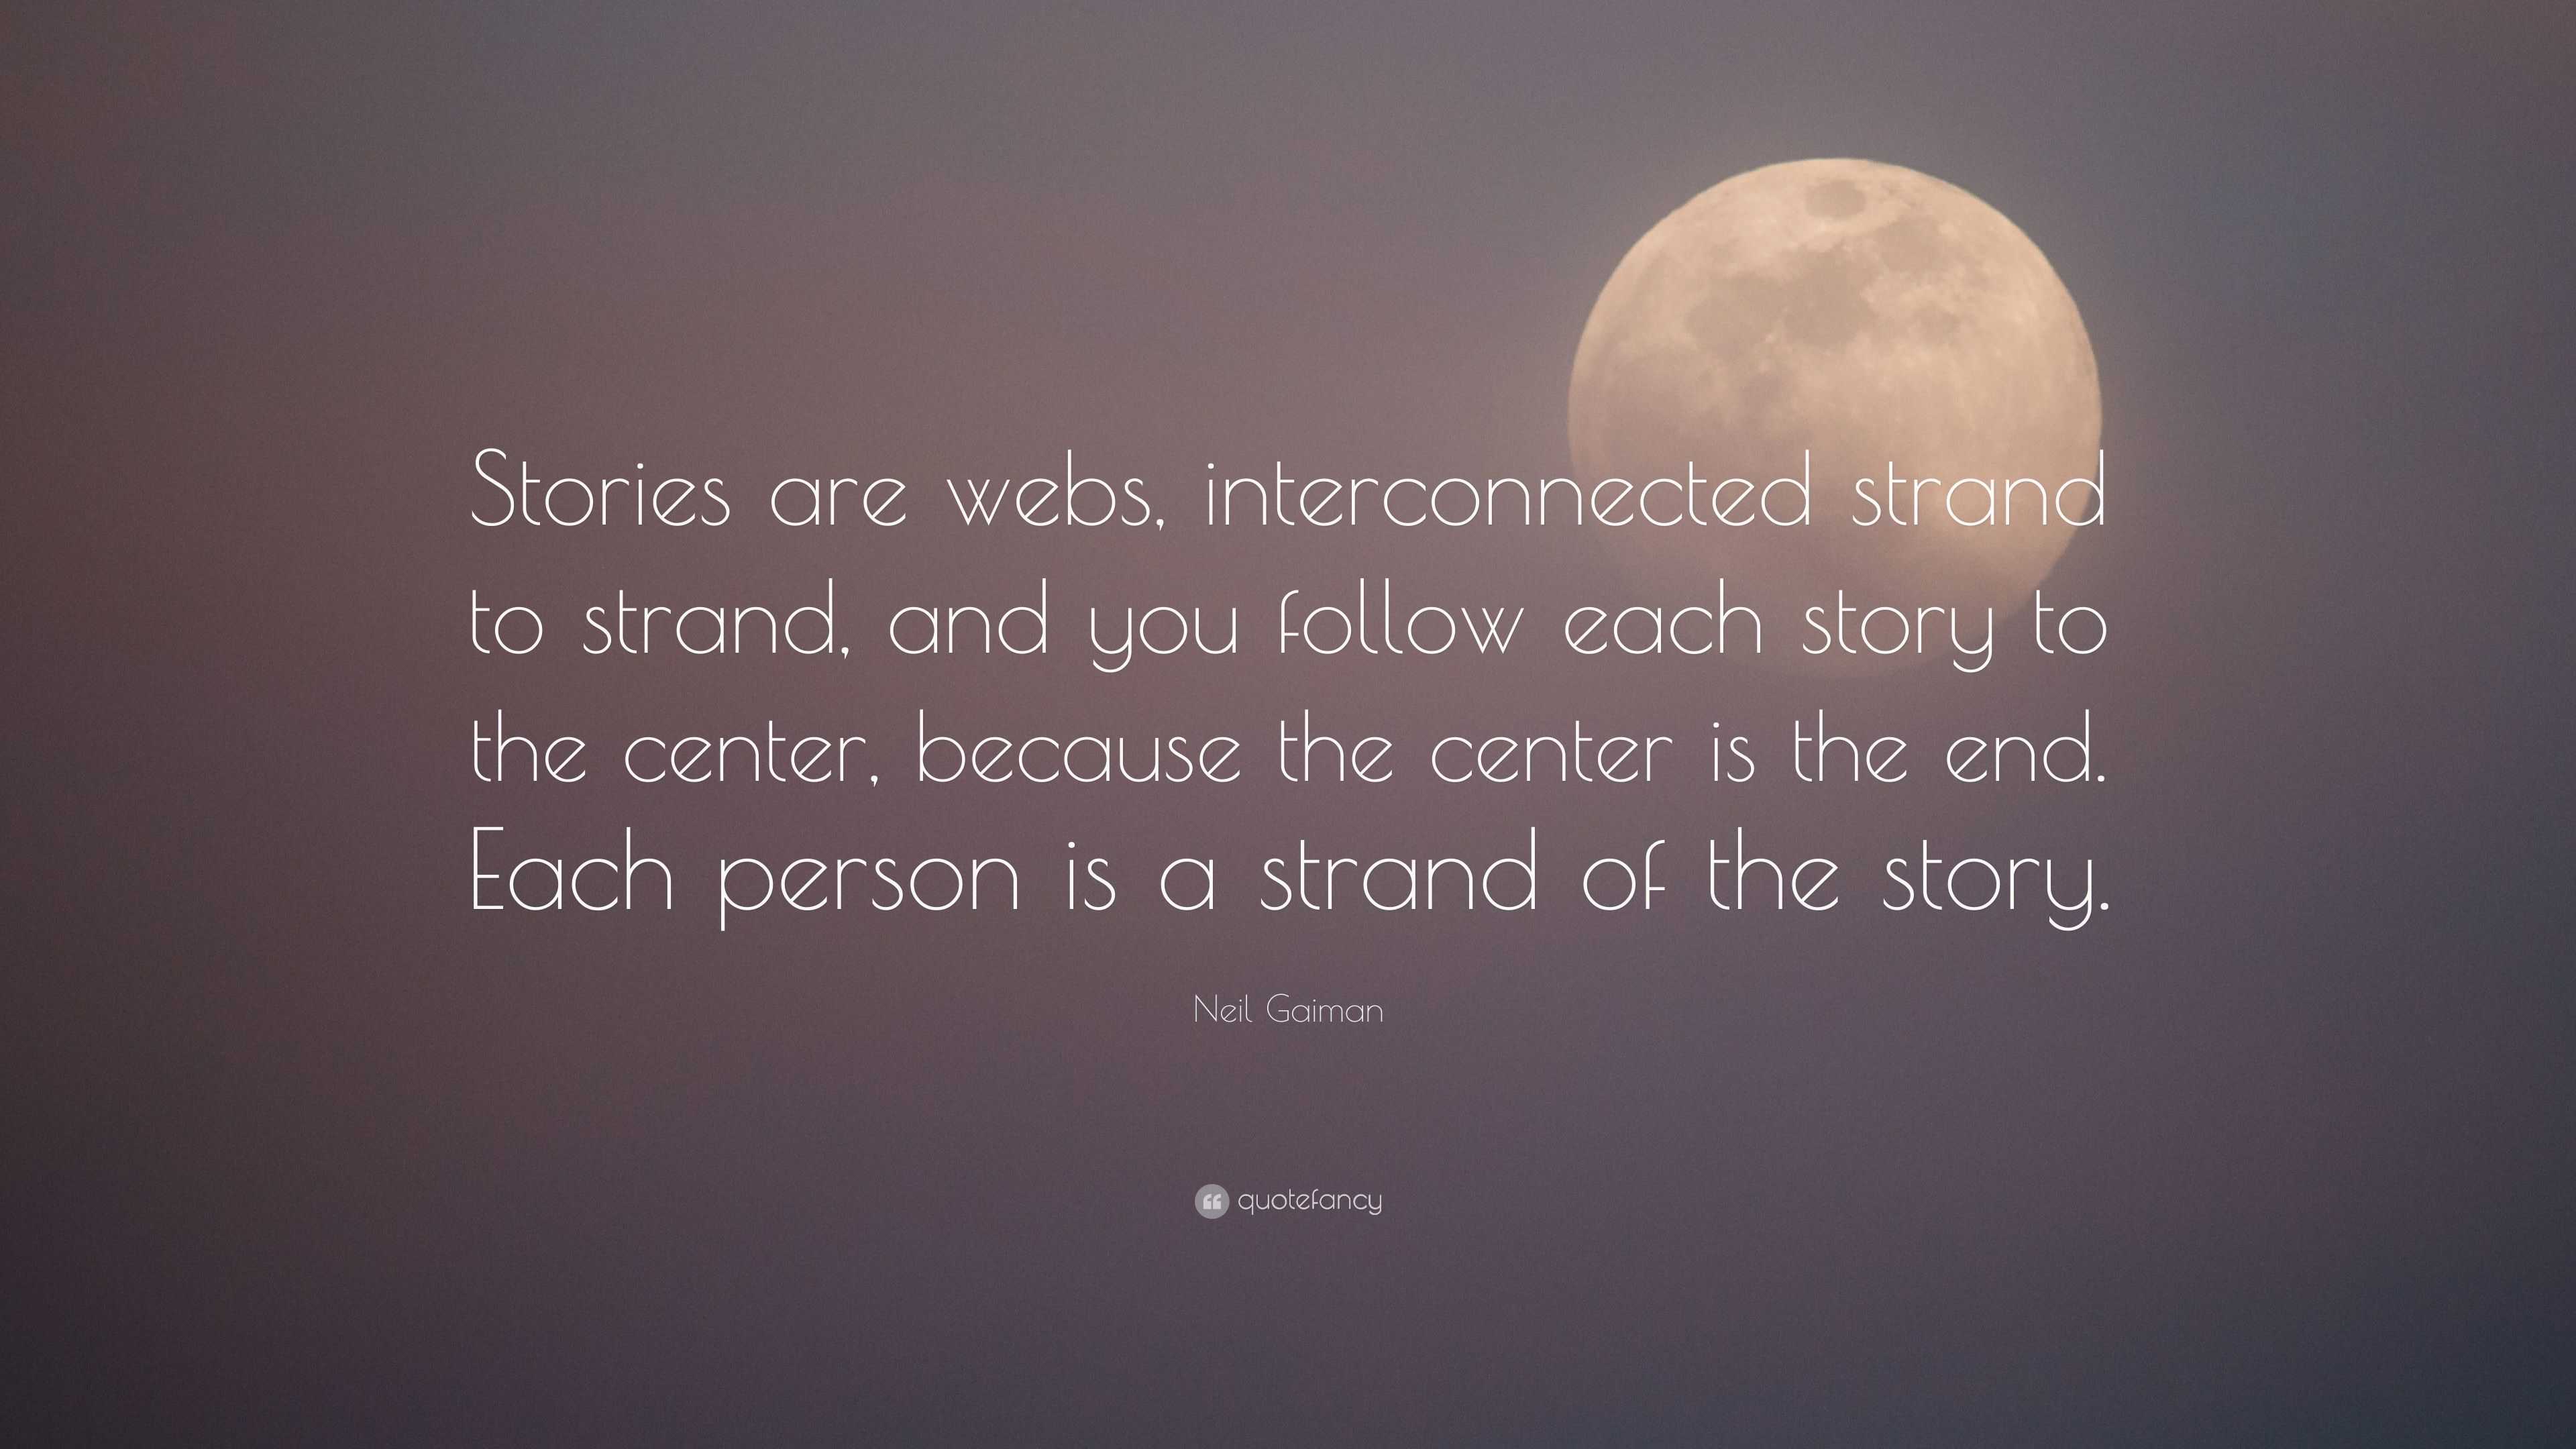 Neil Gaiman Quote: “Stories are webs, interconnected strand to strand ...